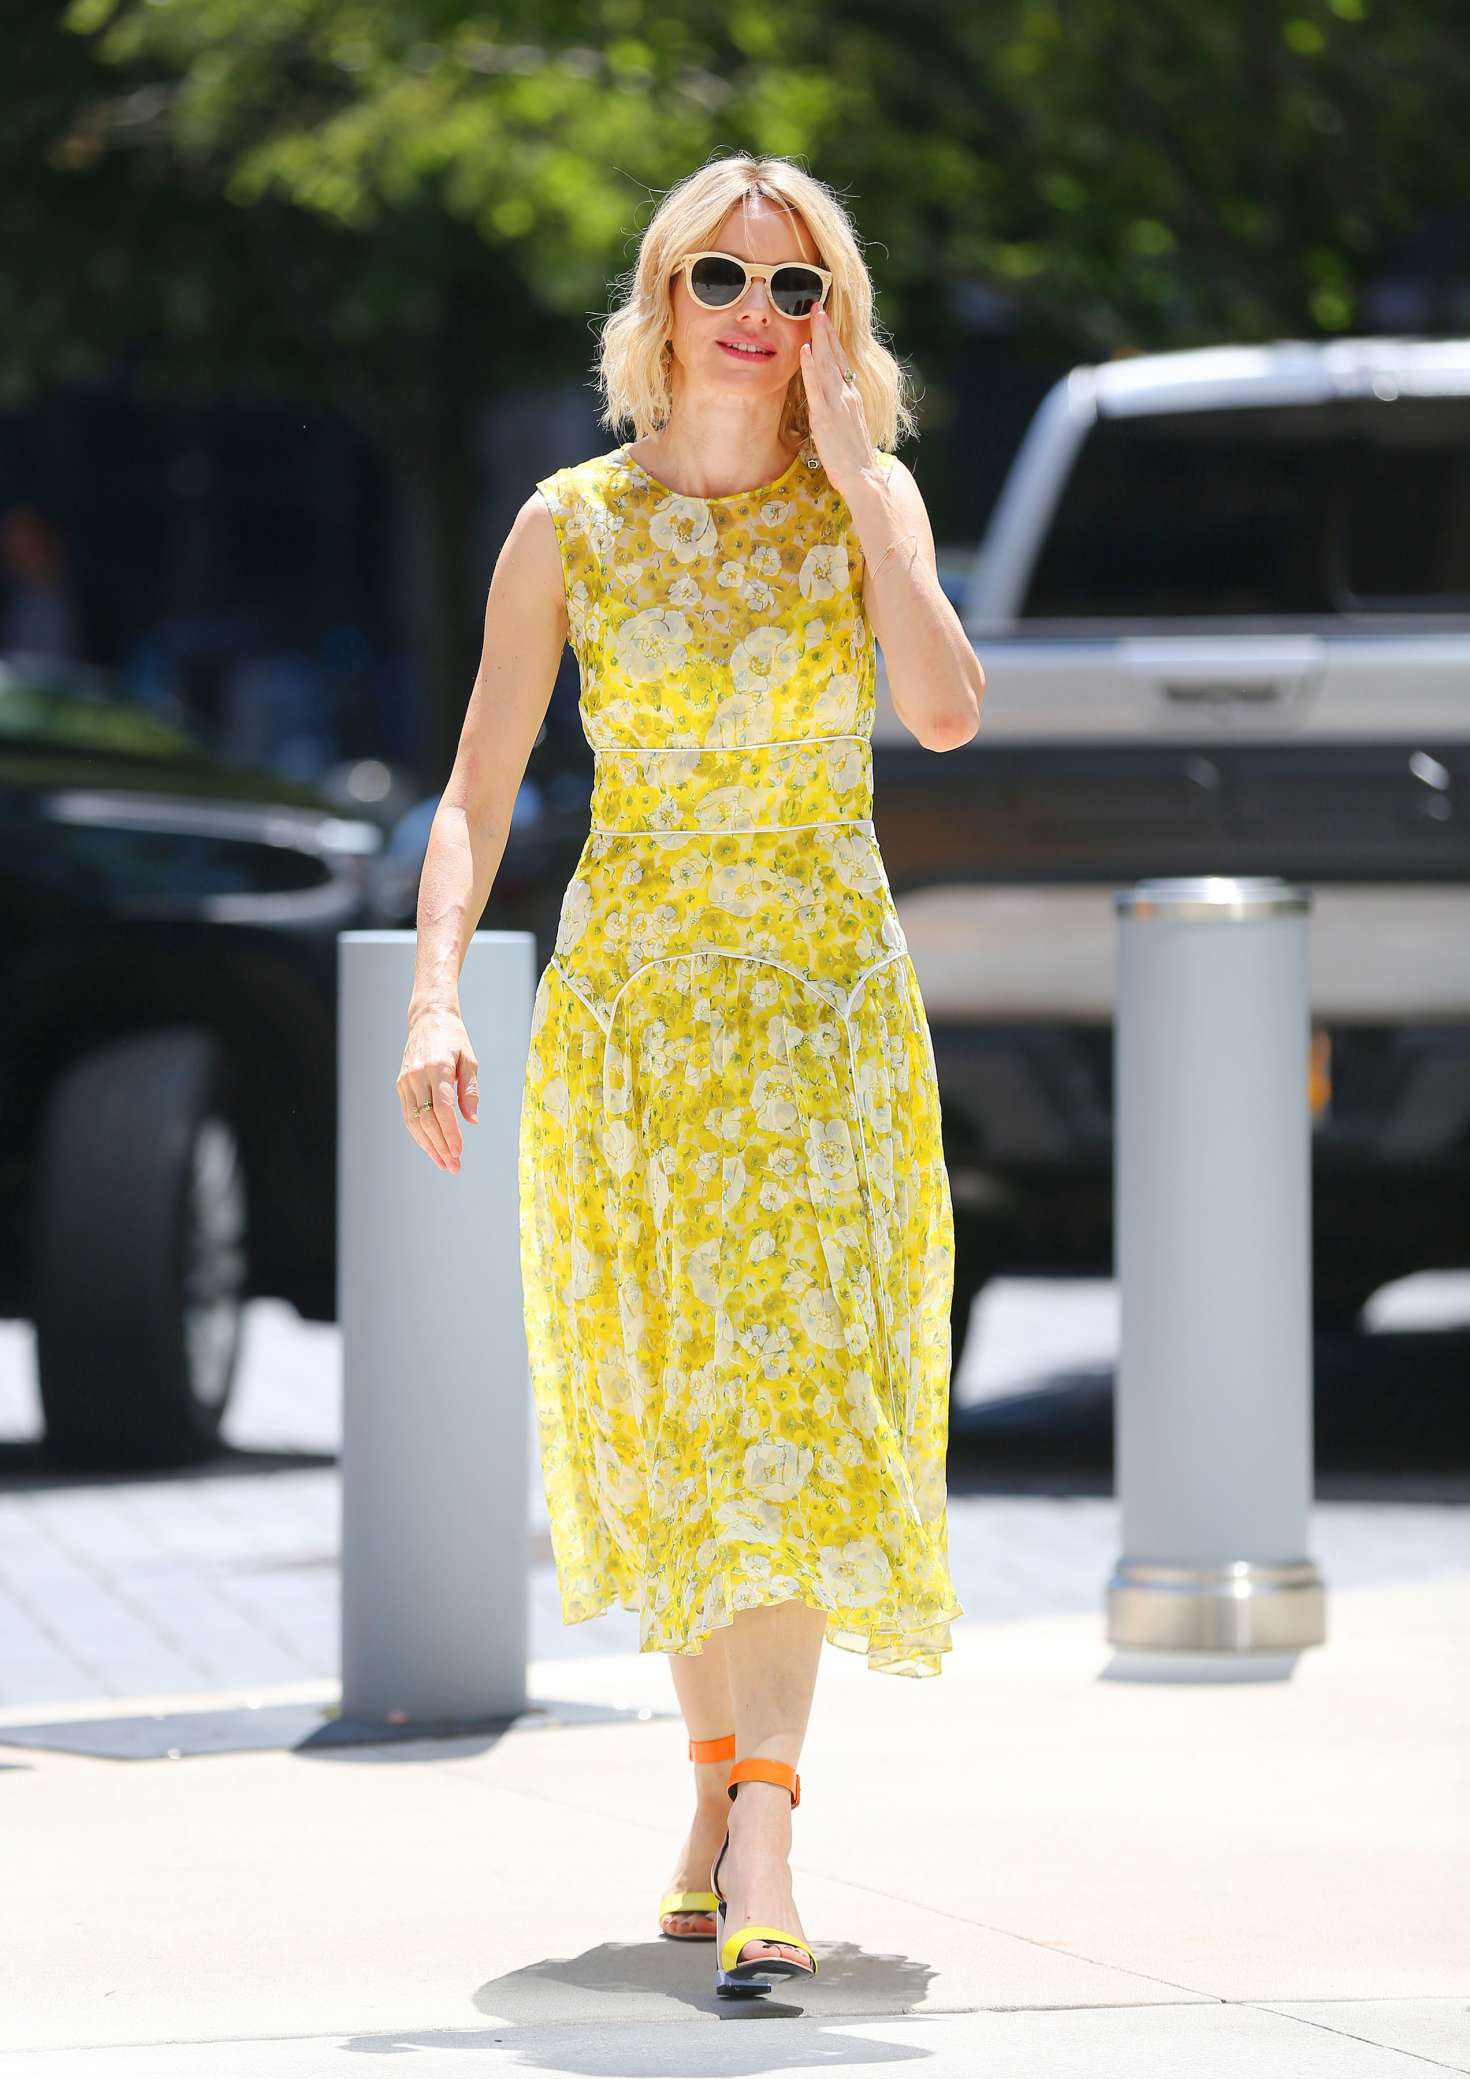 Naomi Watts in a yellow floral dress out in New York City